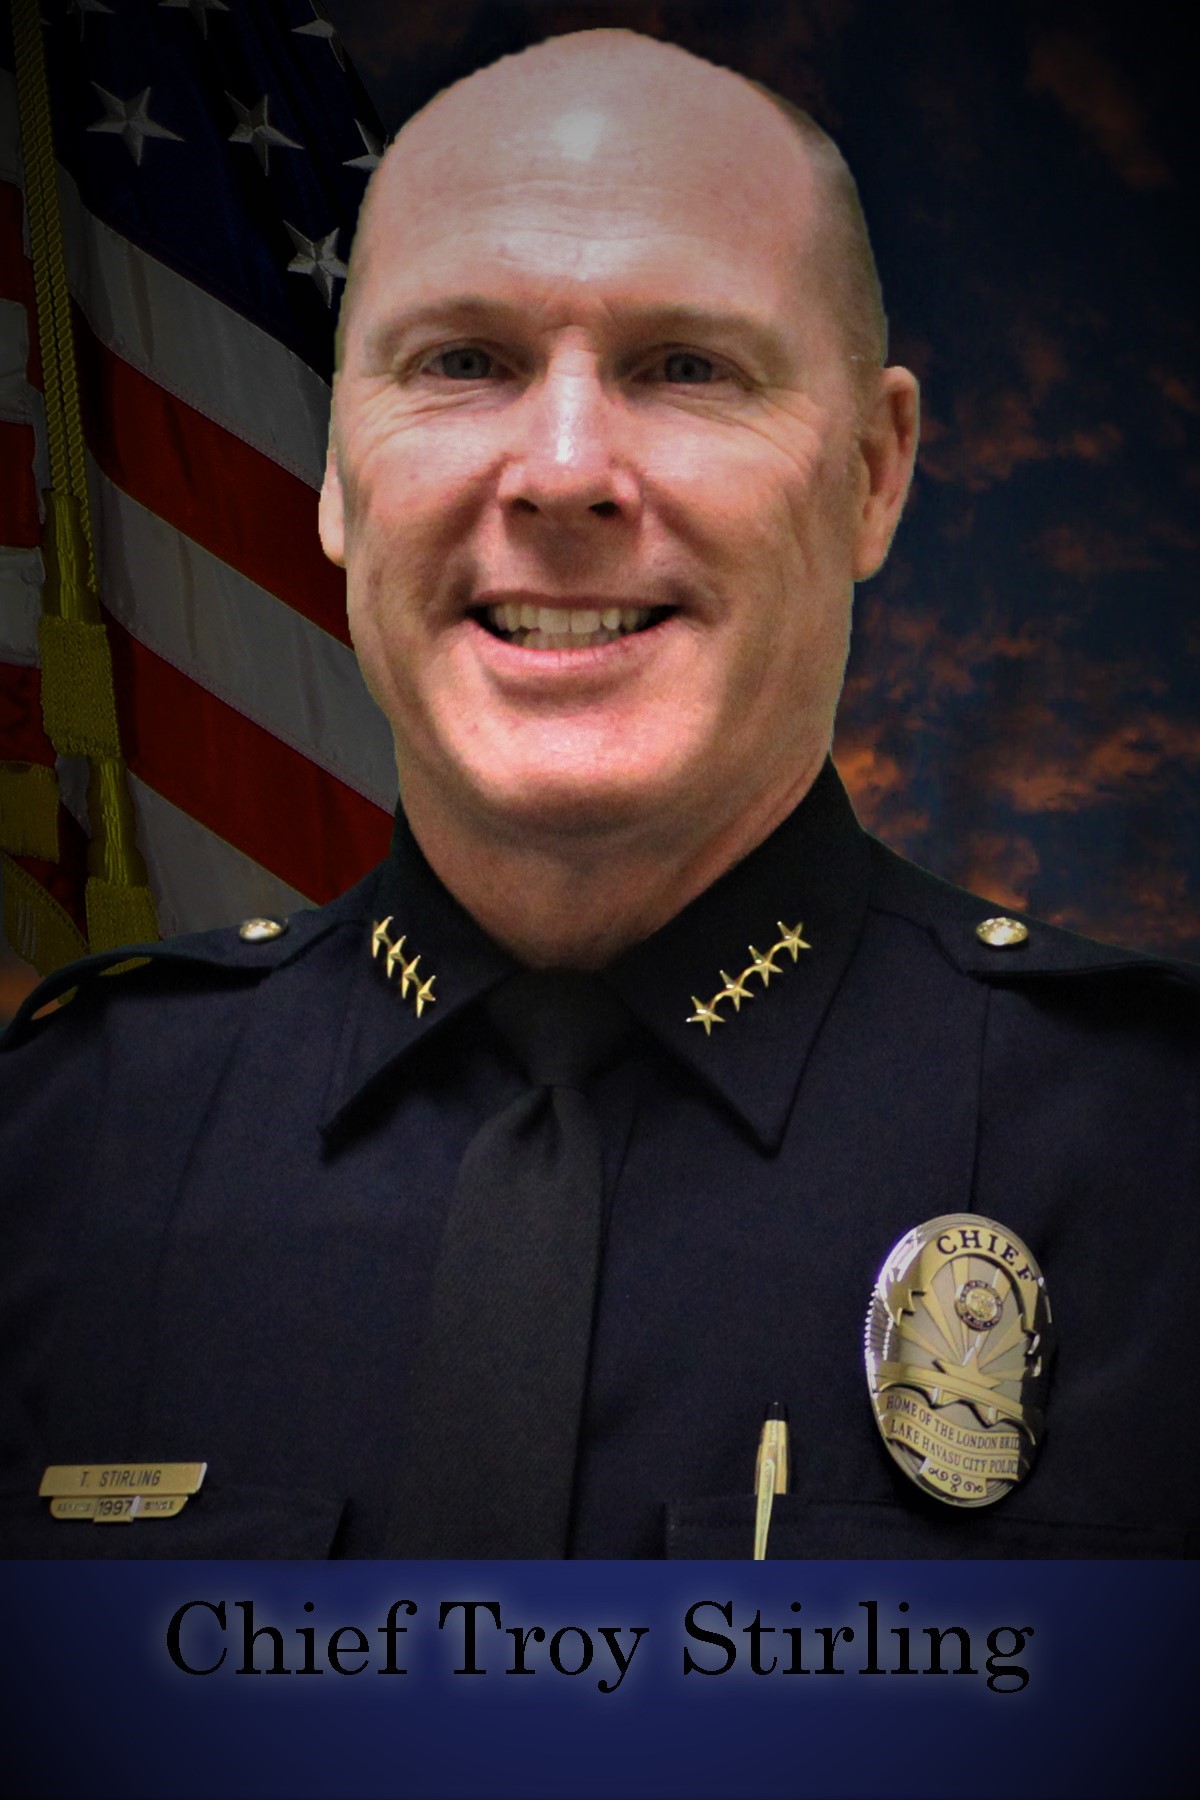 Chief Troy Stirling